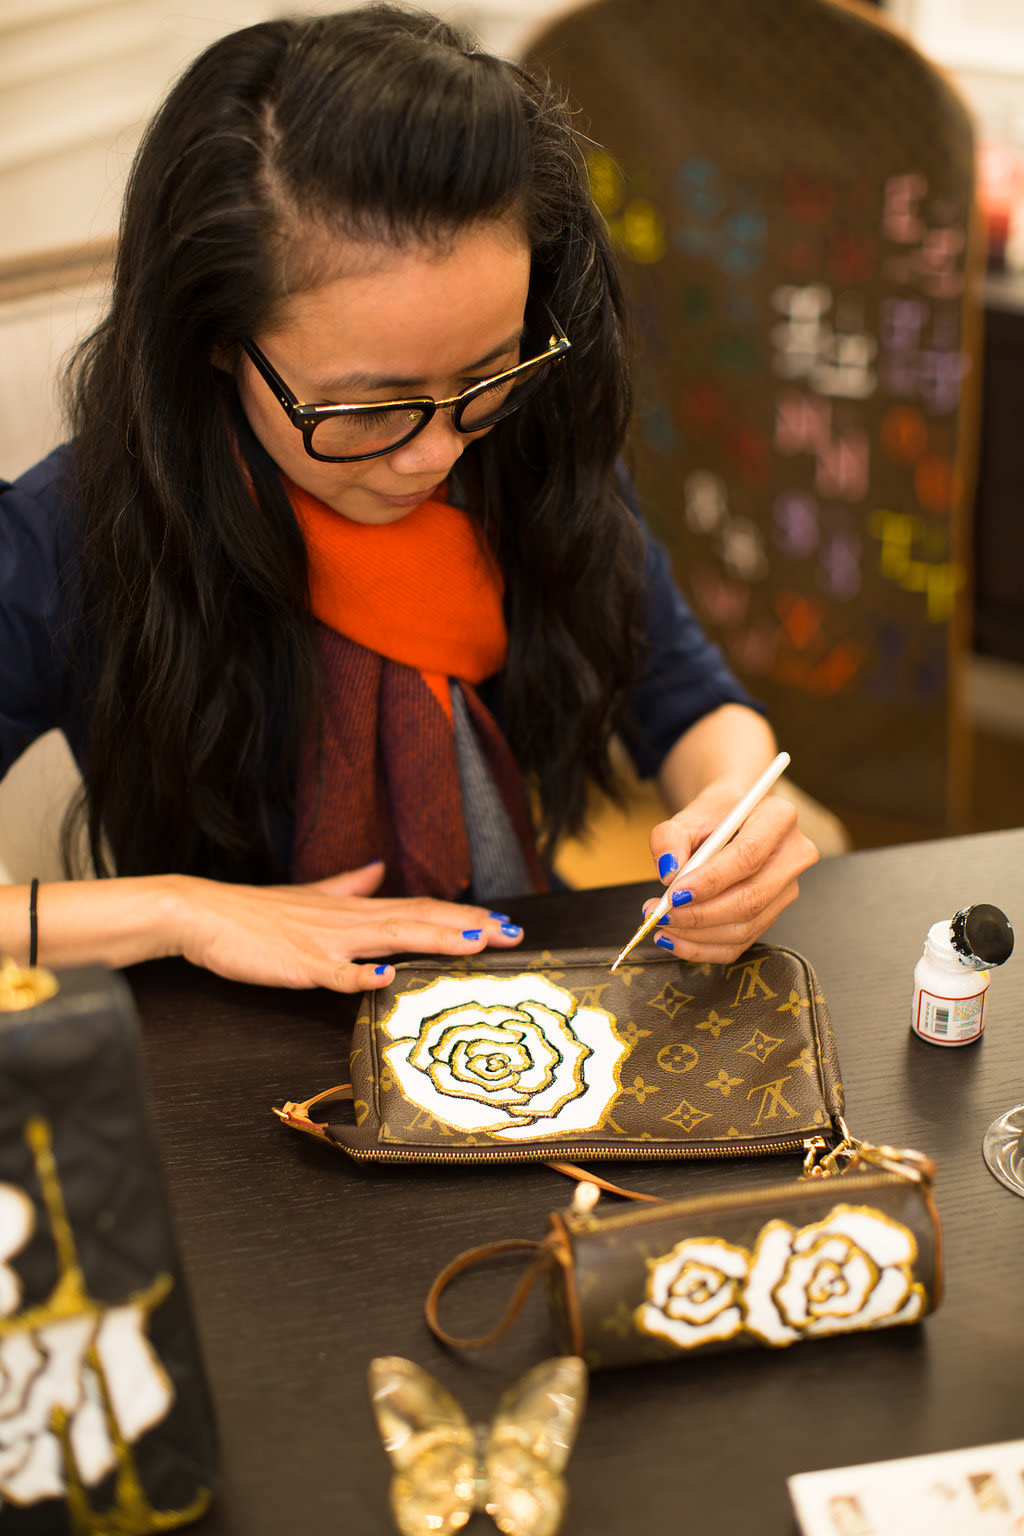 A River Oaks Painting Party Transforms Luxury Bags Into Works of Art